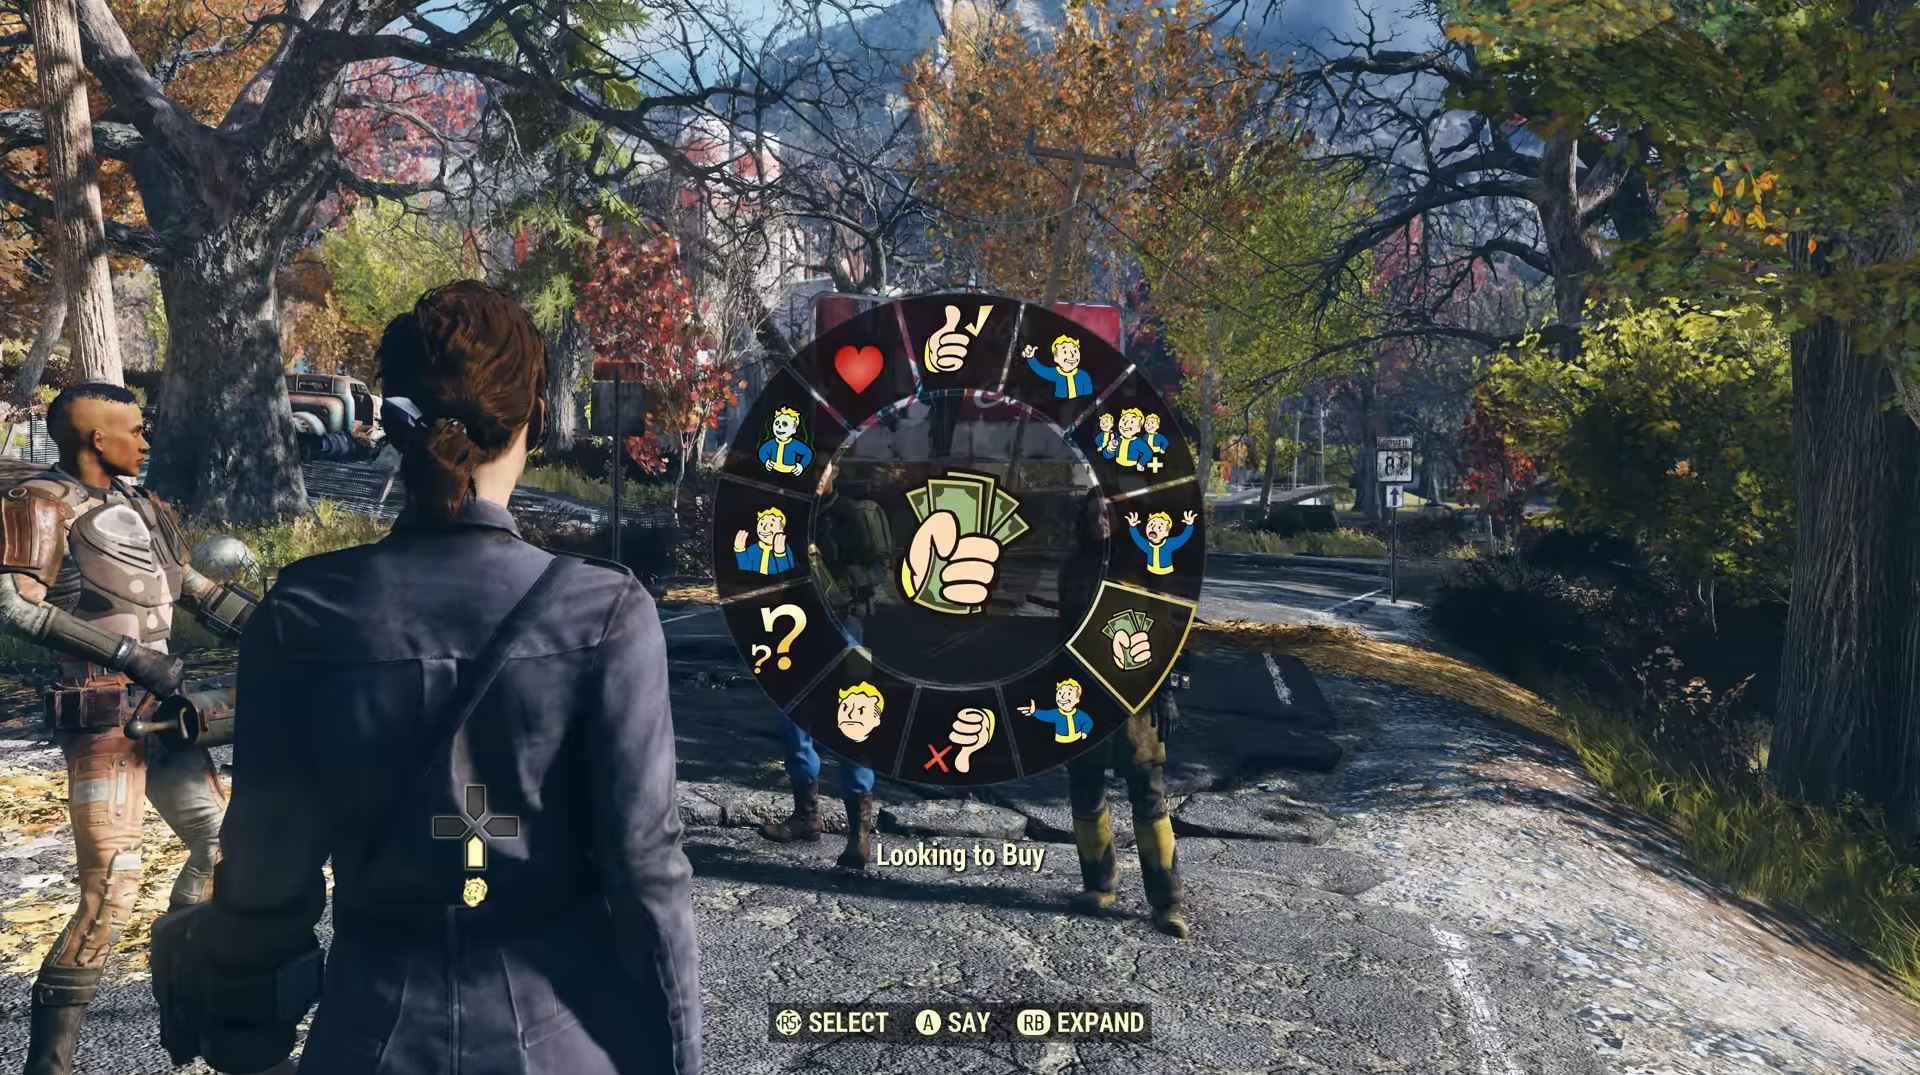 Hands On: Fallout 76 PS4 Beta Has Us Worried for the Full Game